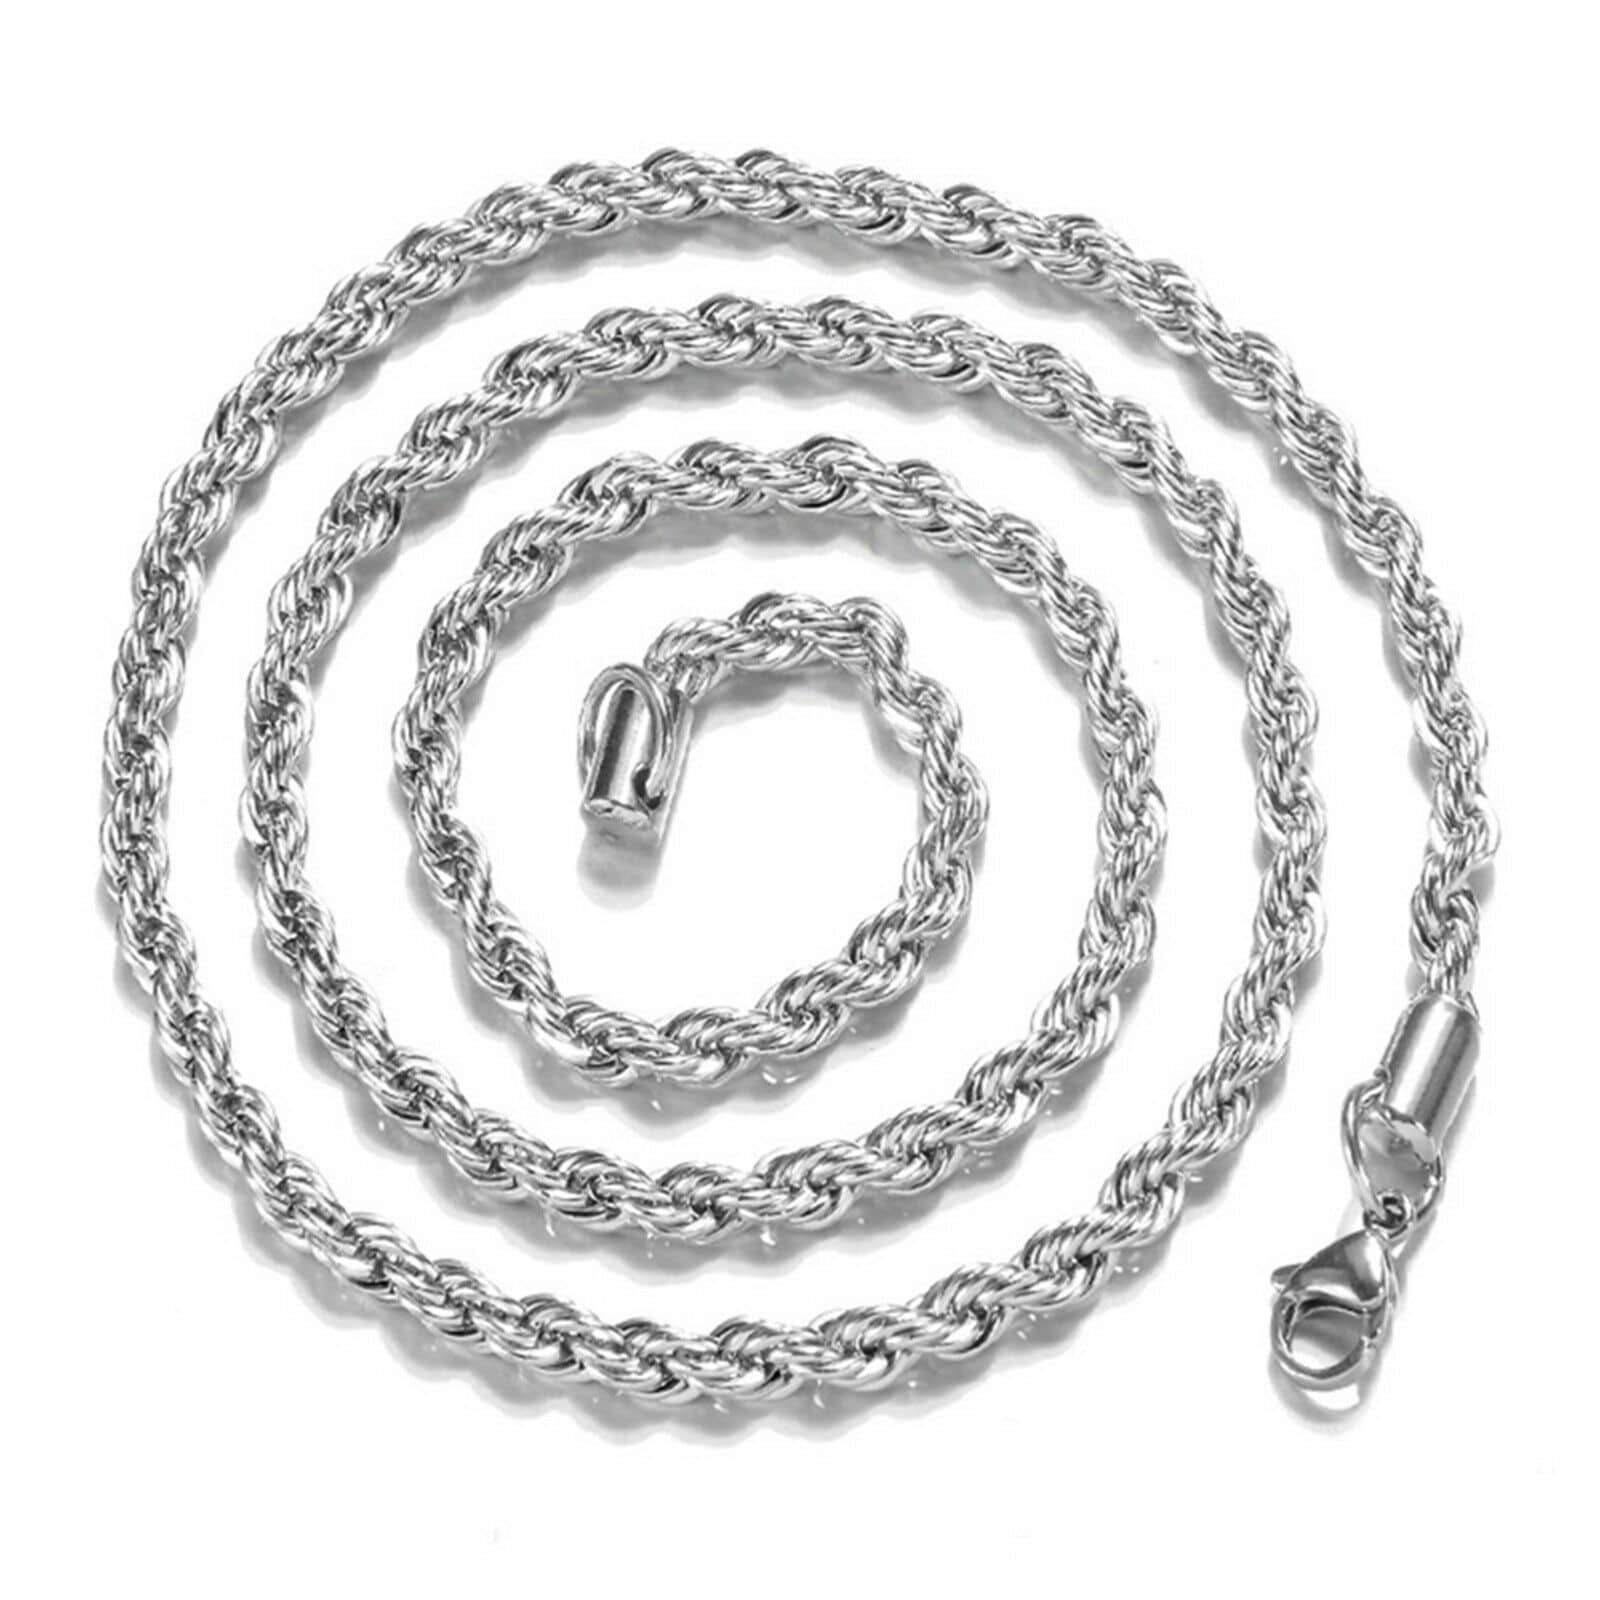 David Yurman DY Madison 8.5mm Chain Necklace in Sterling Silver with 18k  Yellow Gold, 18